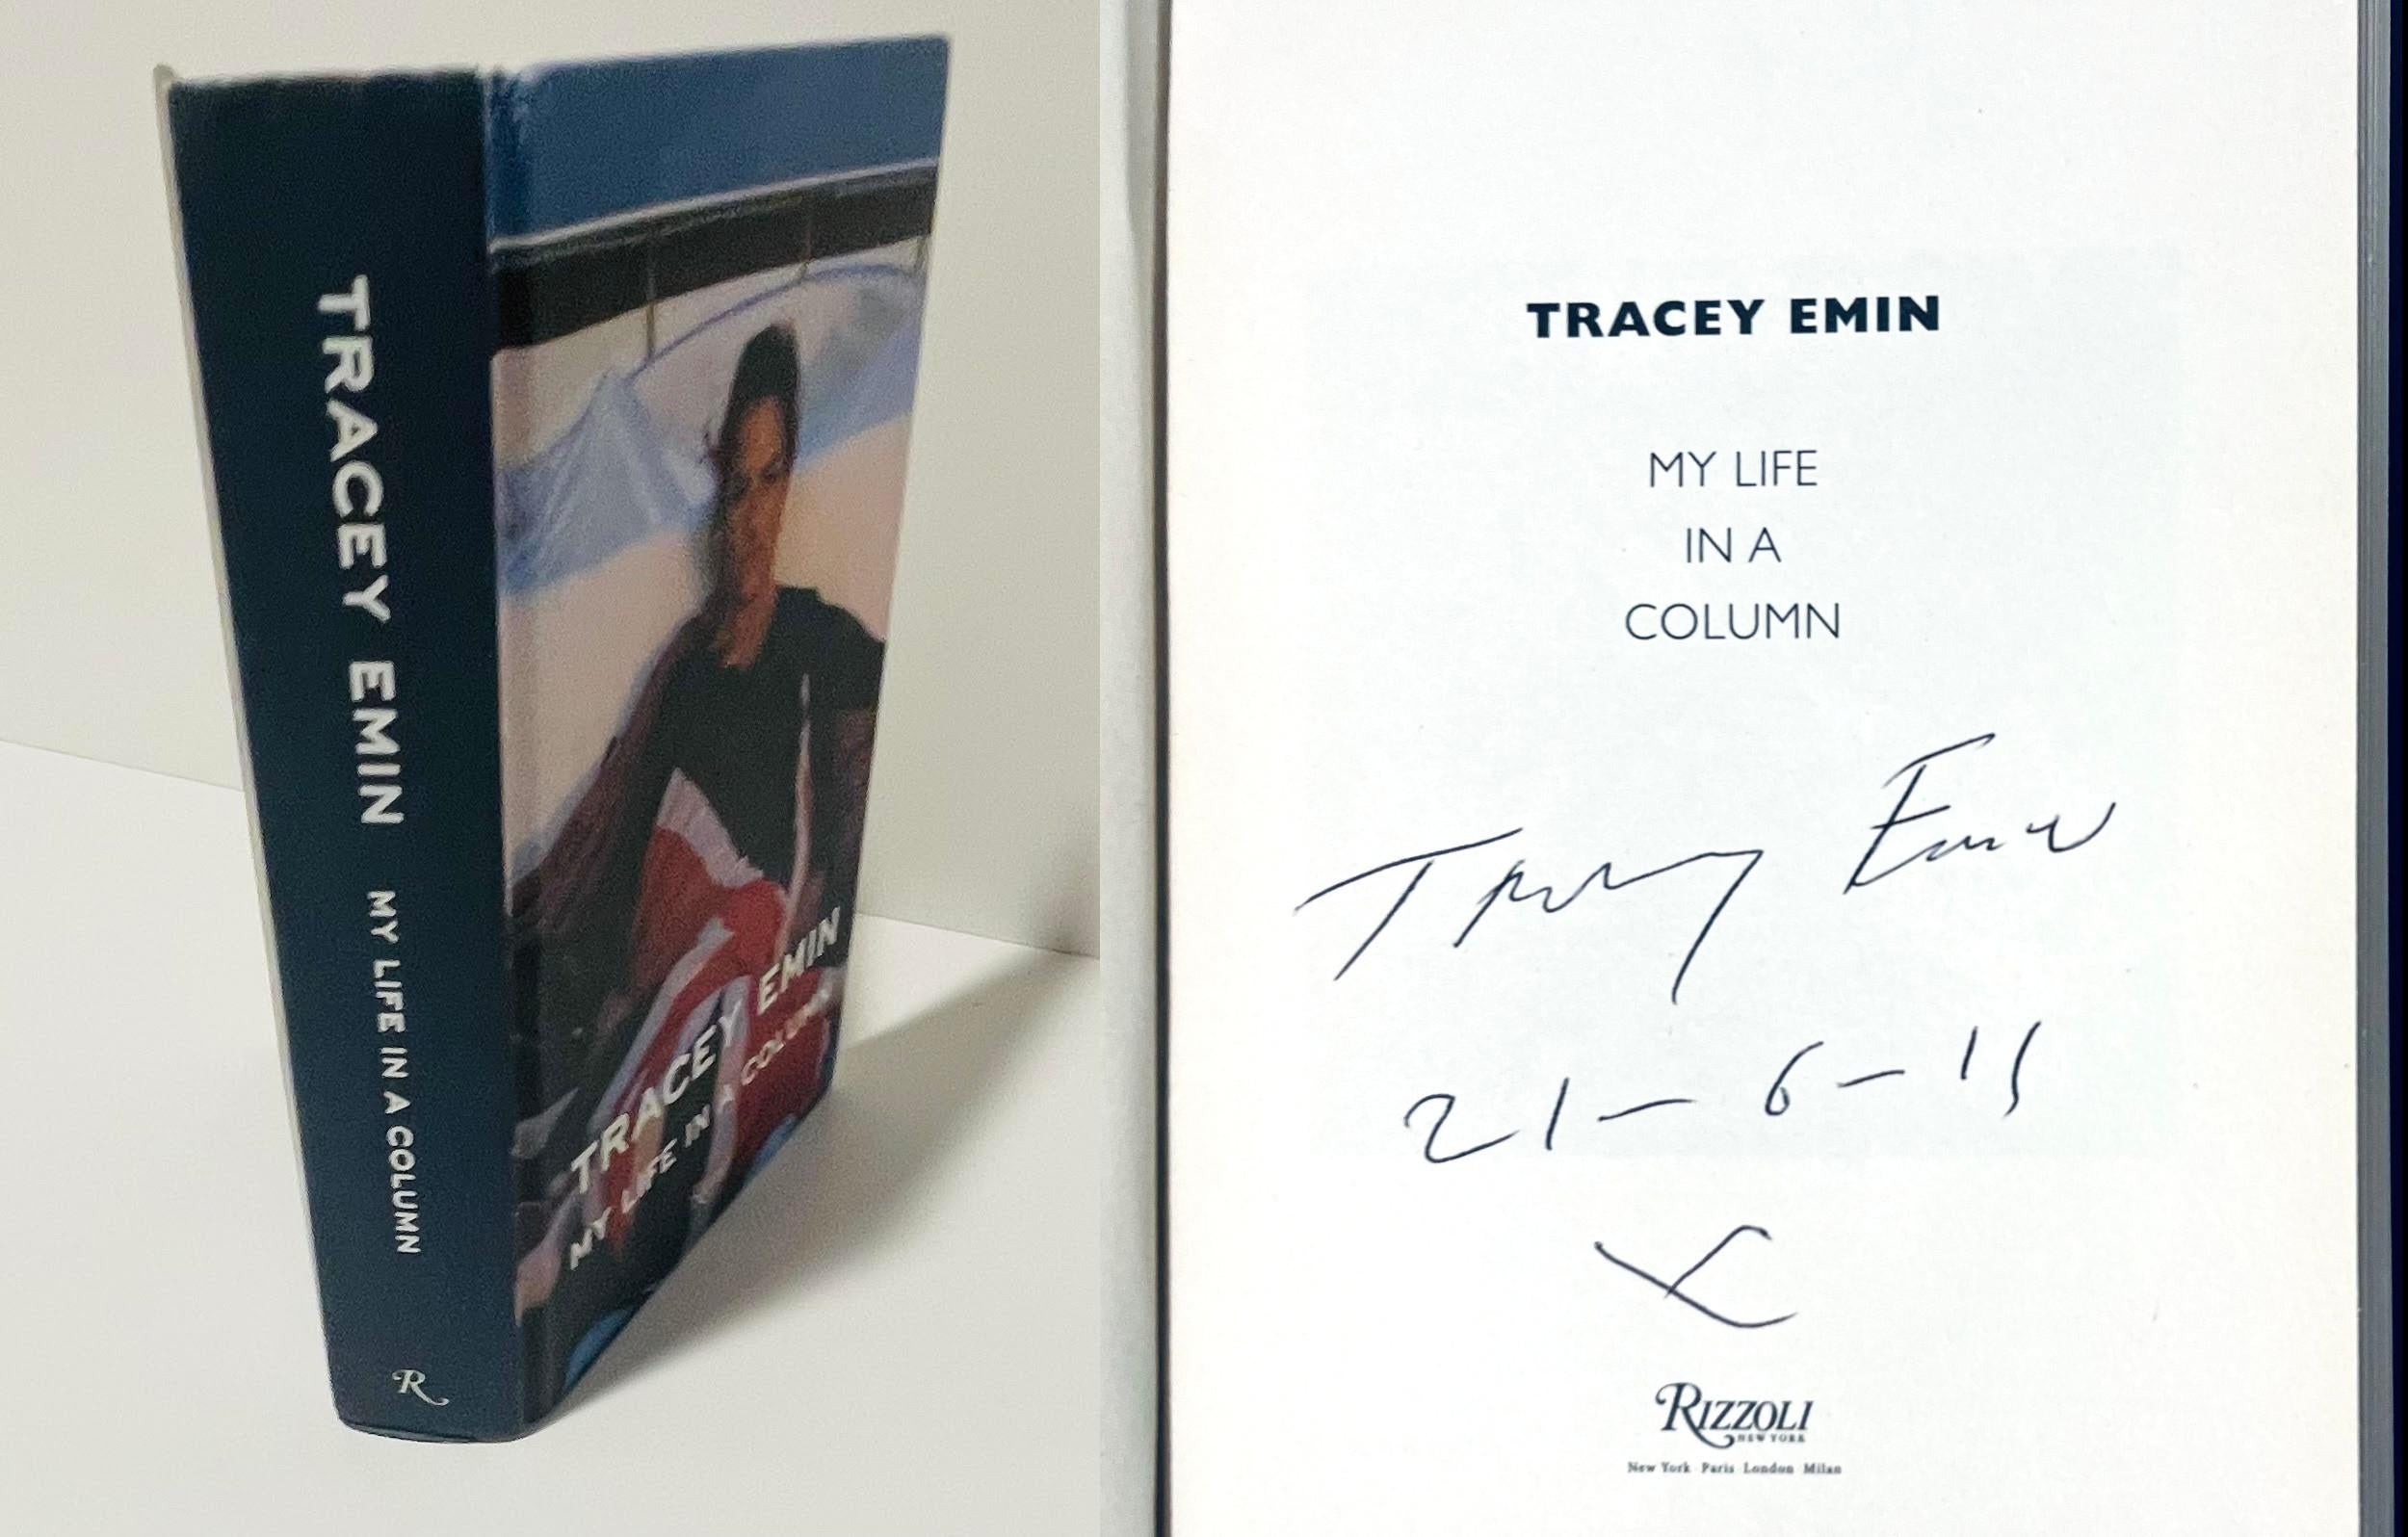 Monograph: My Life in a Column (book hand signed and dated by Tracey Emin)